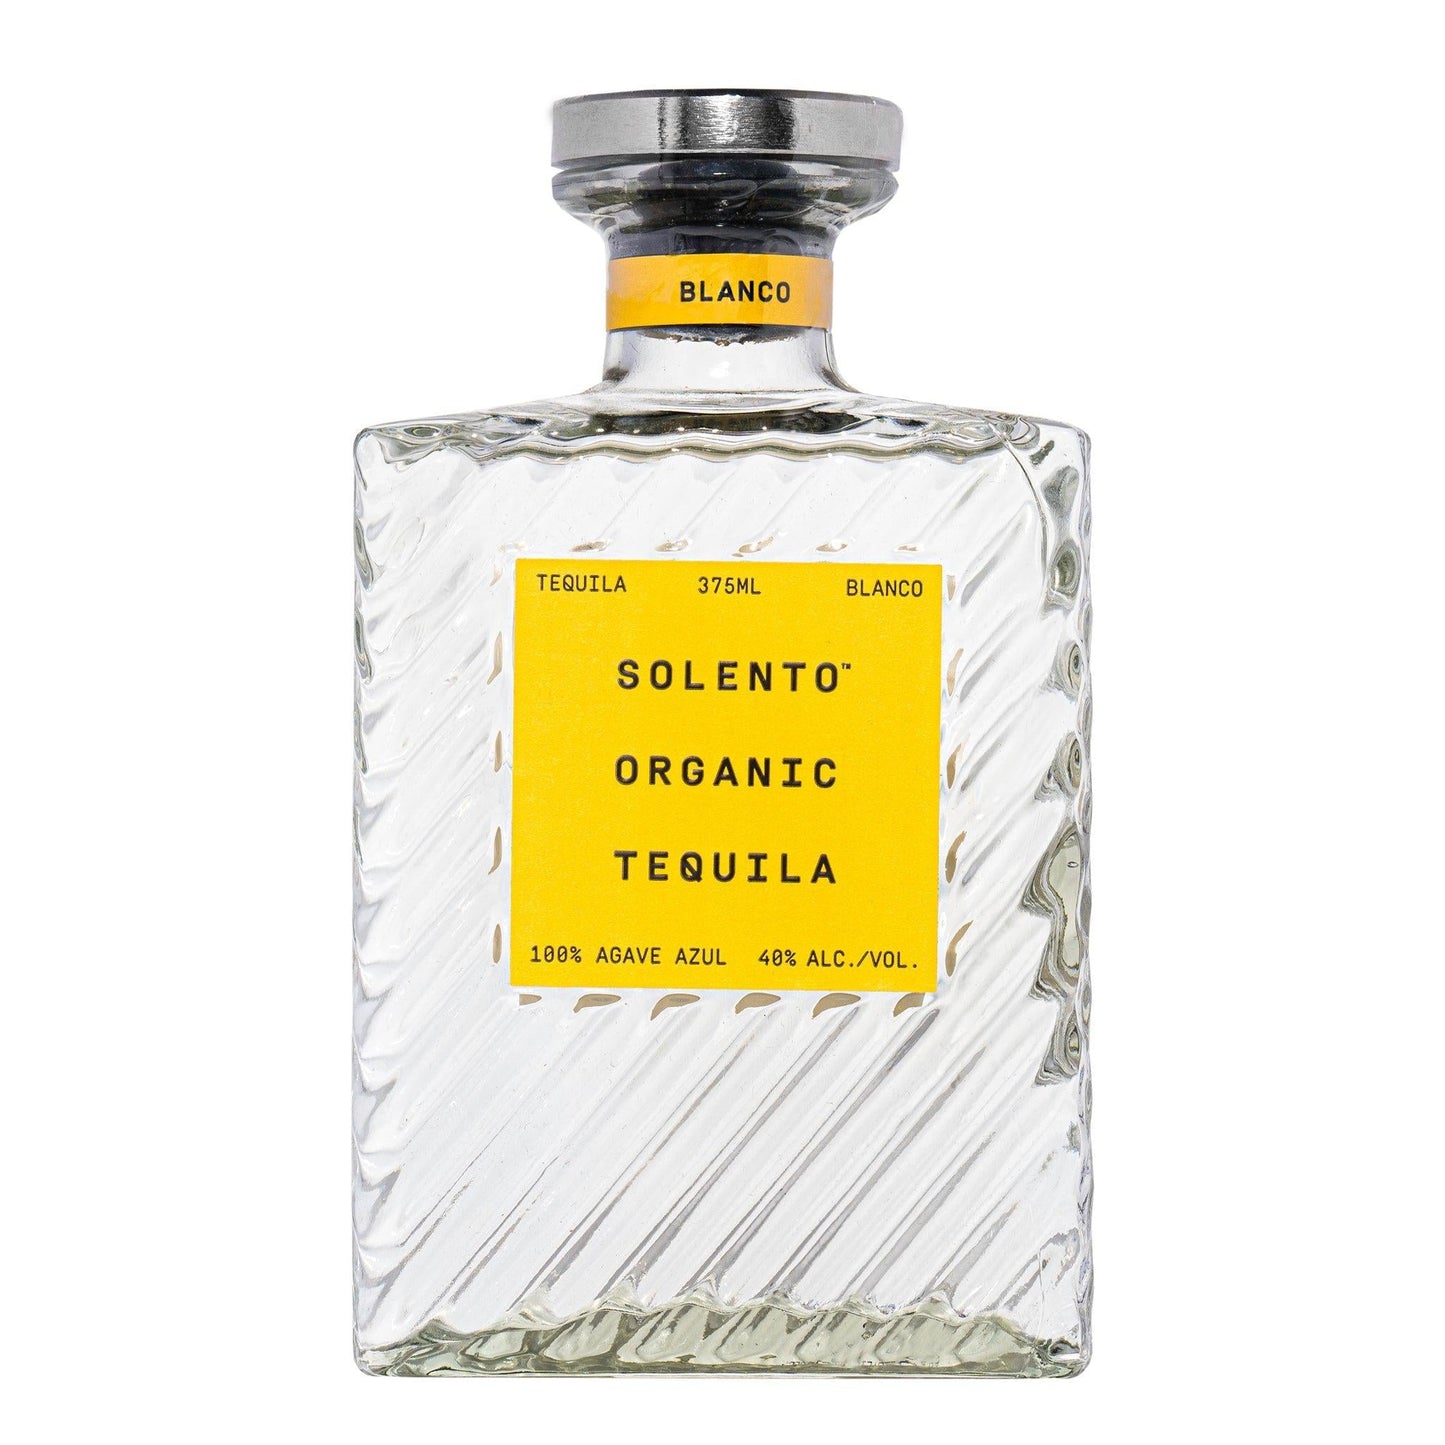 Solento - Organic Tequila Blanco (375ML) by The Epicurean Trader